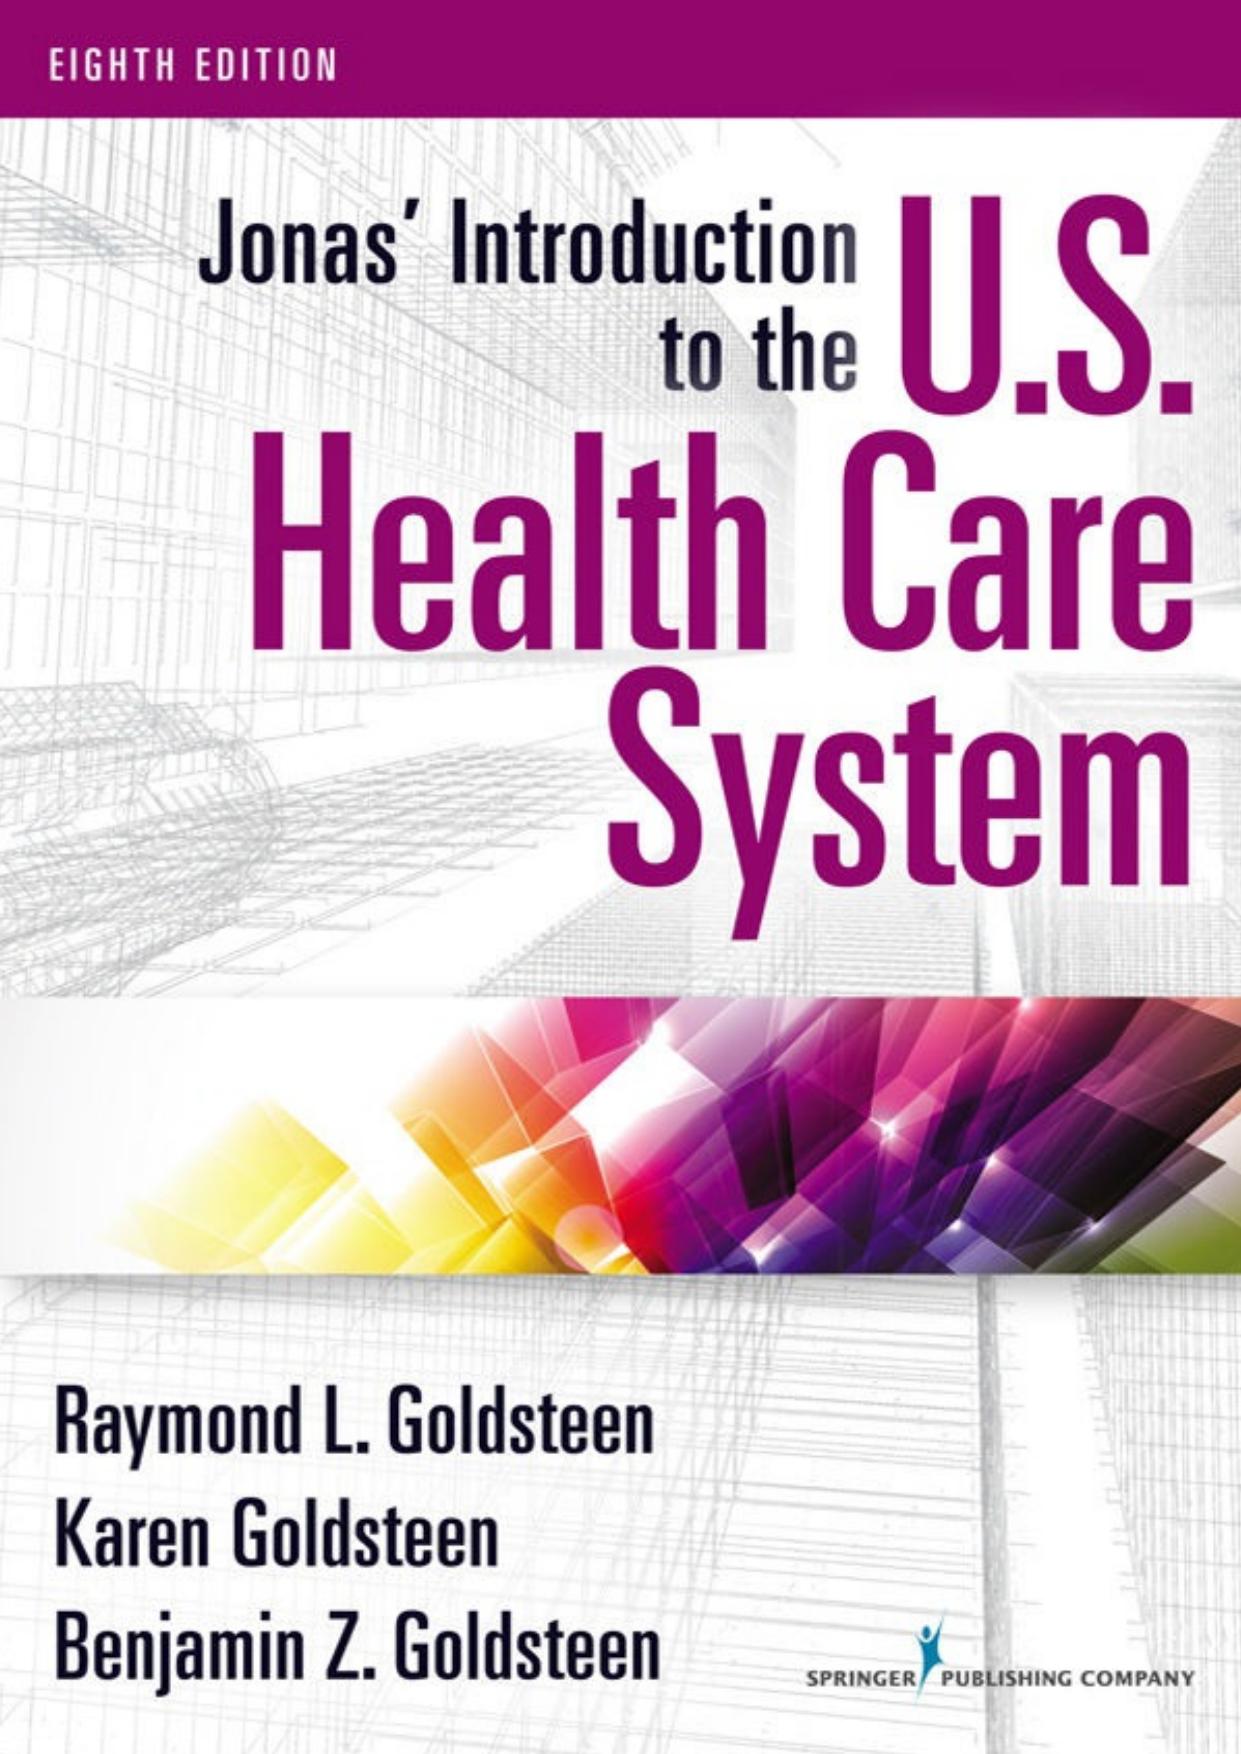 Jonas' Introduction to the U.S. Health Care System, 8th Edition by Raymond L. Goldsteen.jpg